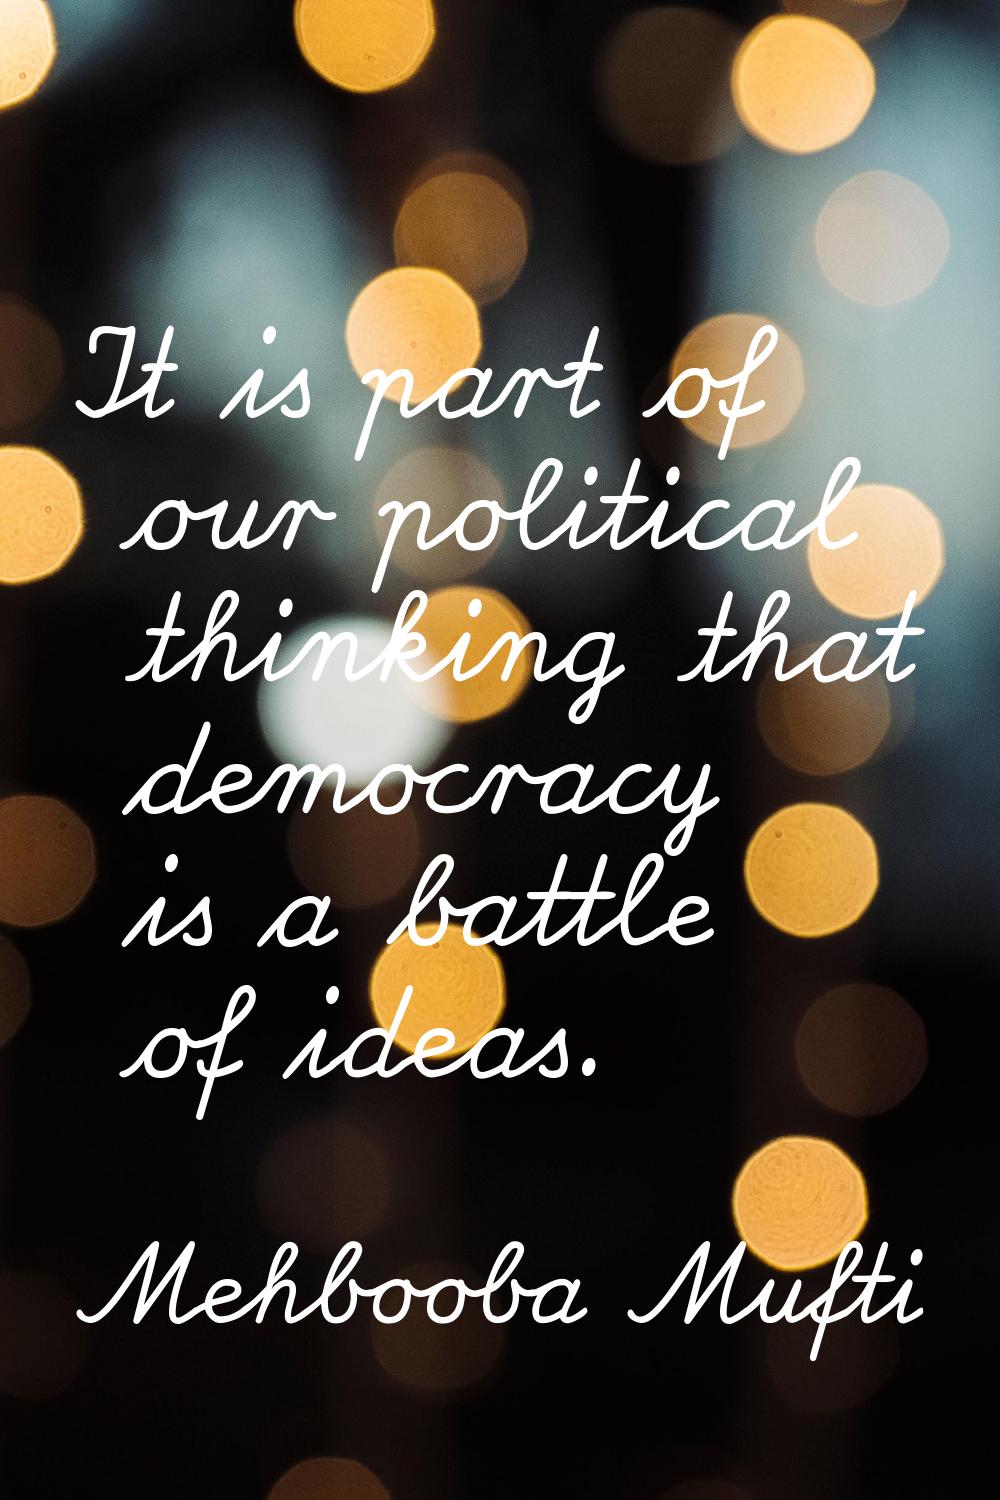 It is part of our political thinking that democracy is a battle of ideas.